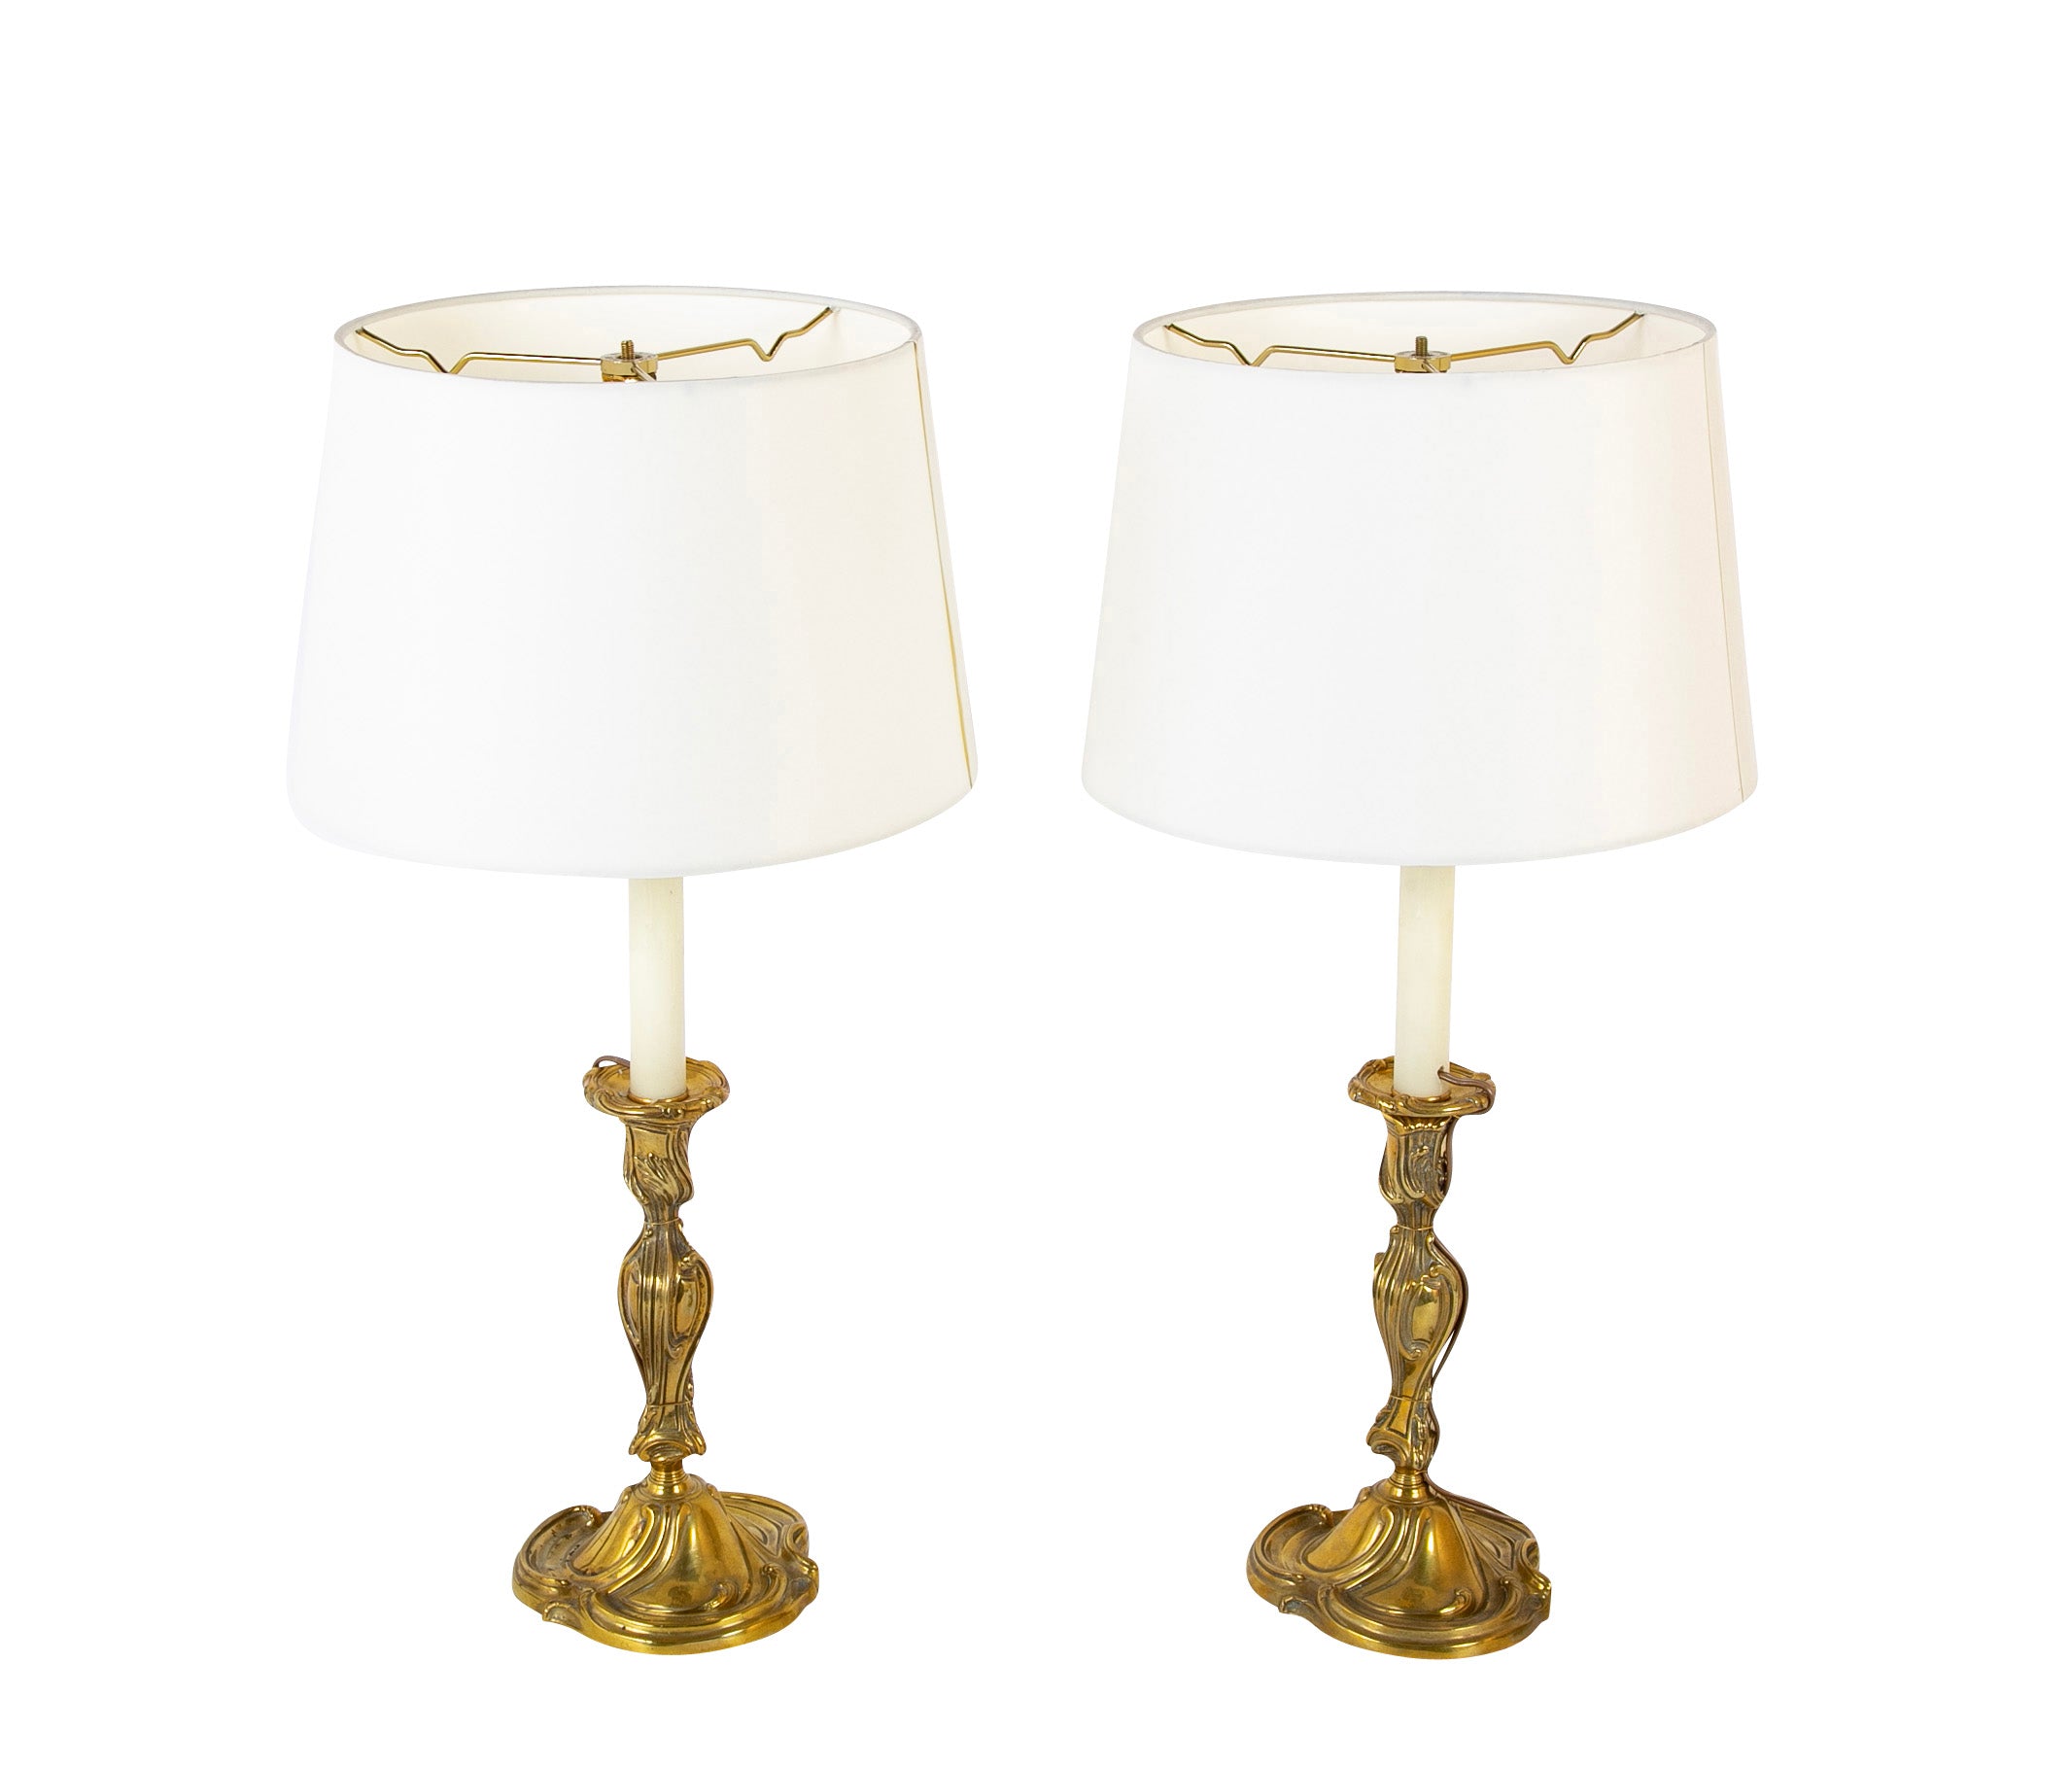 Pair of Gilt Bronze Rococo Style Candlesticks now Lamps